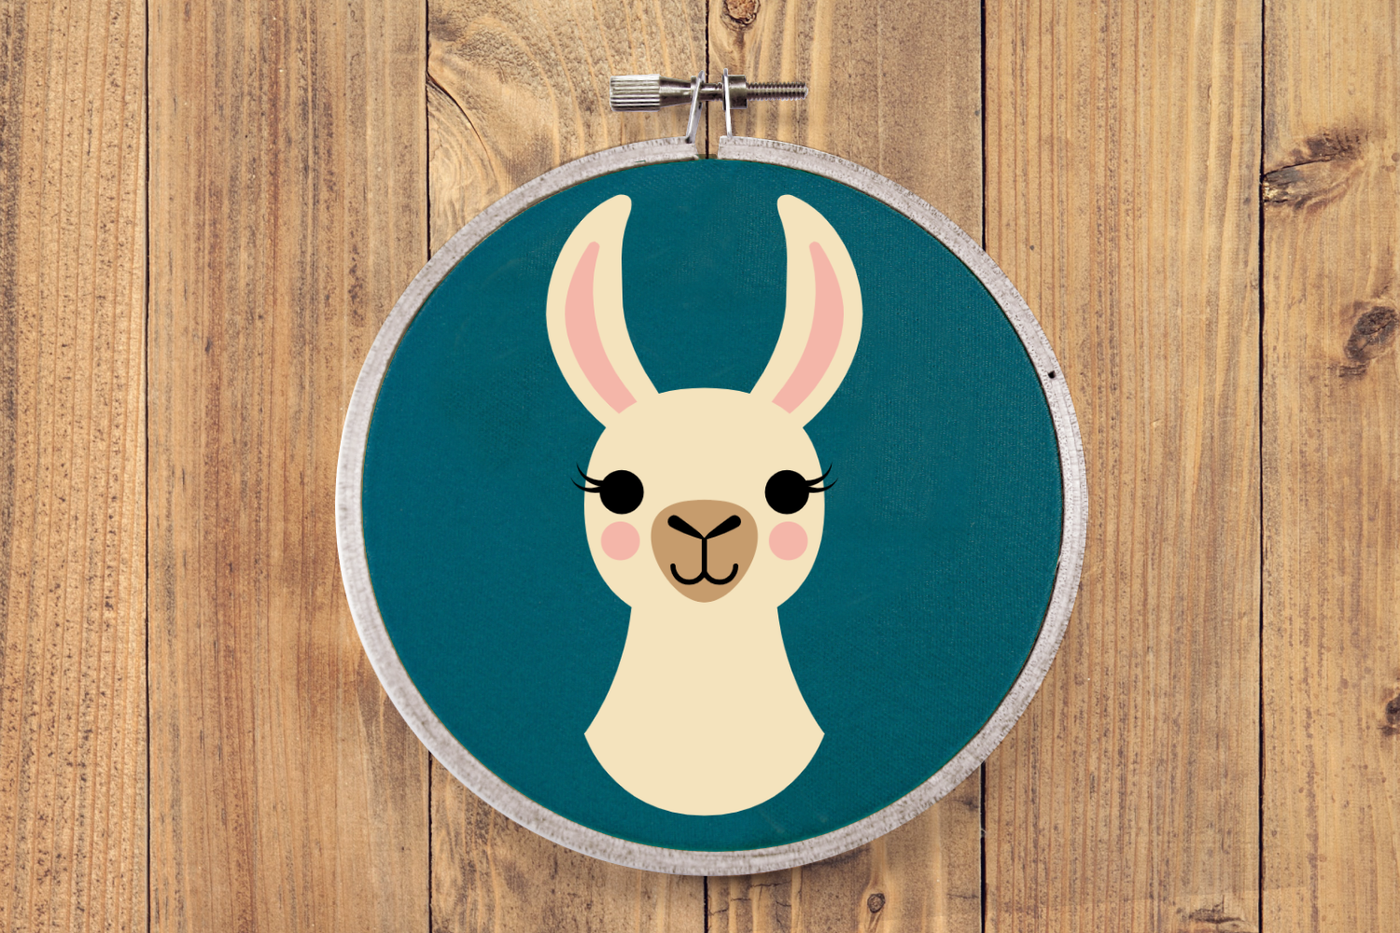 Cute smiling llama design from the neck up